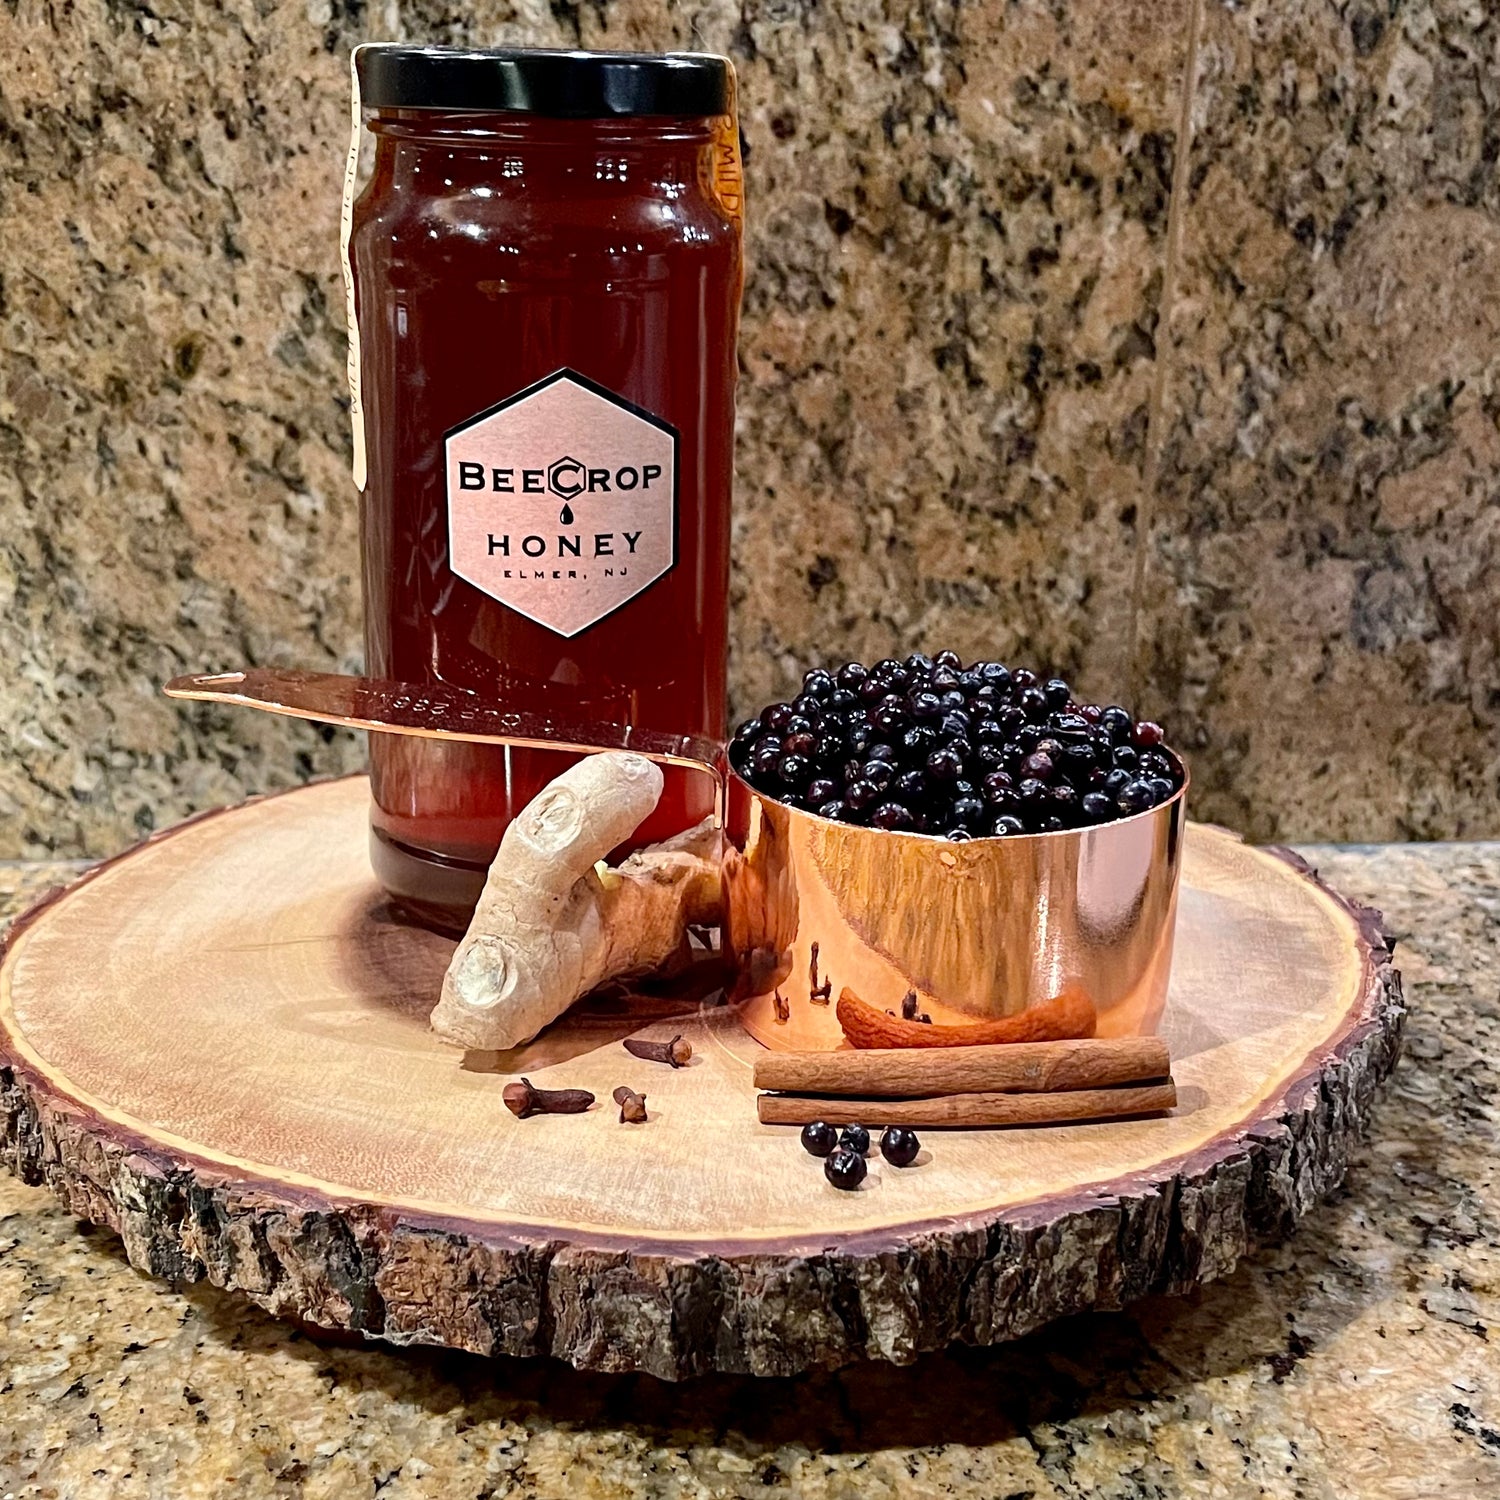 How to Make Elderberry Syrup with Fresh Berries